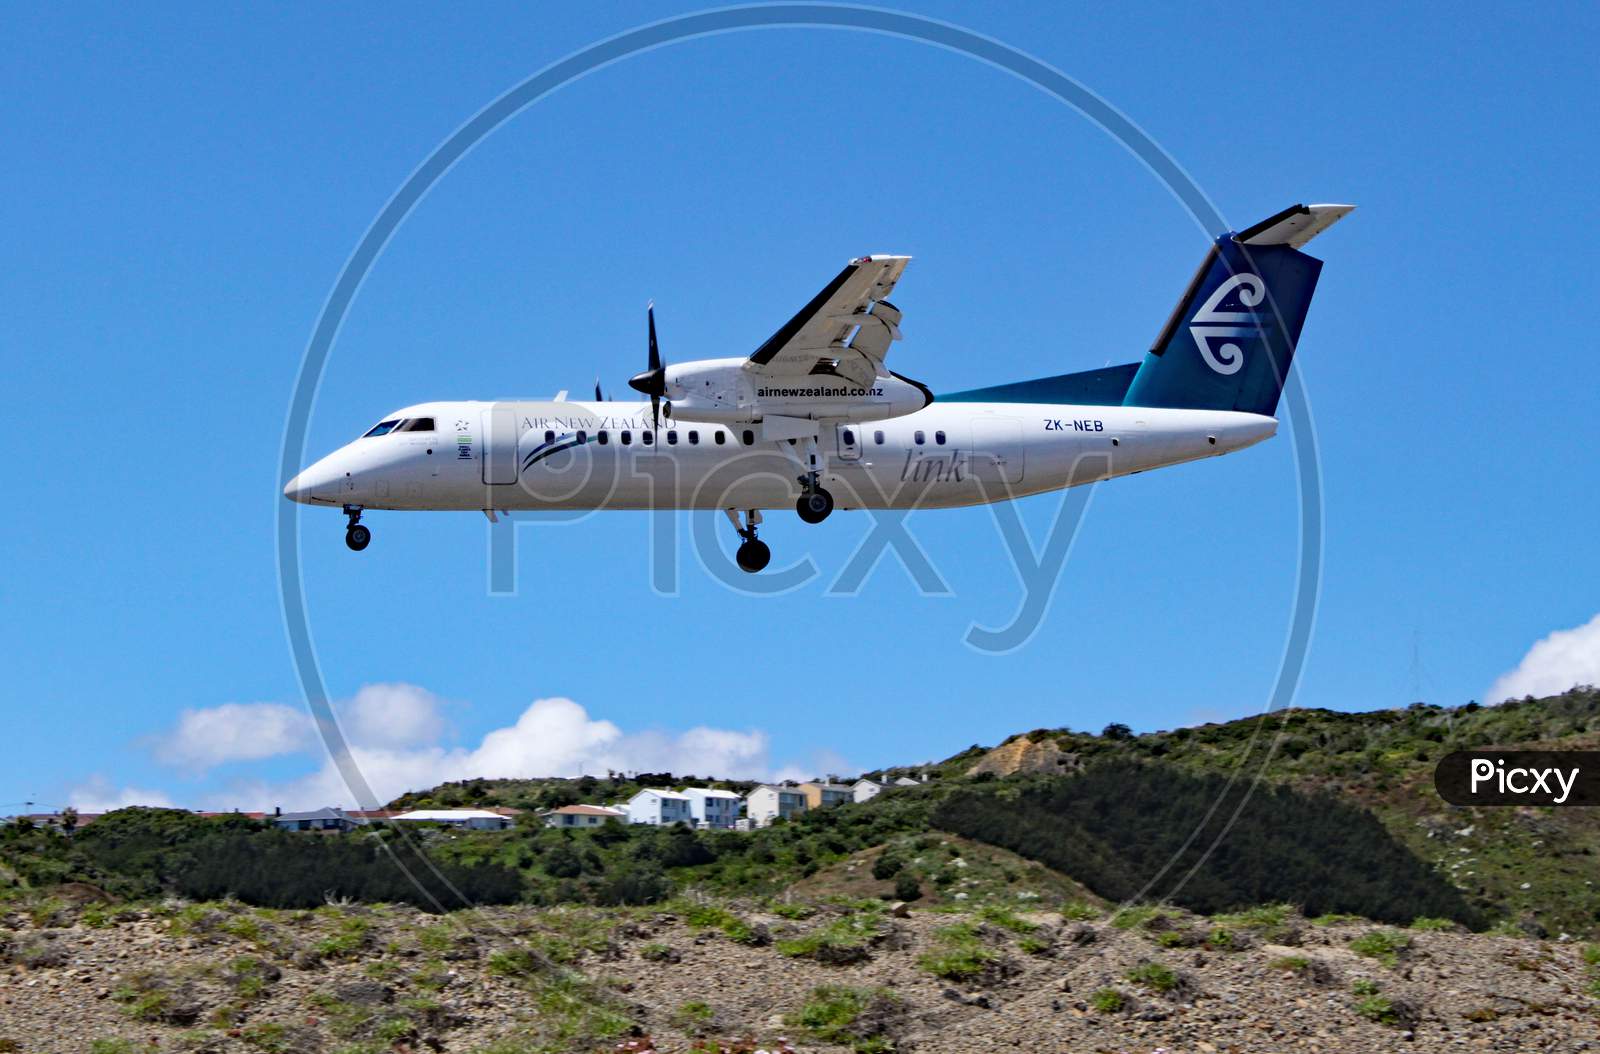 An Air New Zealand De Havilland Canada Dash 8 Comes In To Land At Wellington Airport, New Zealand